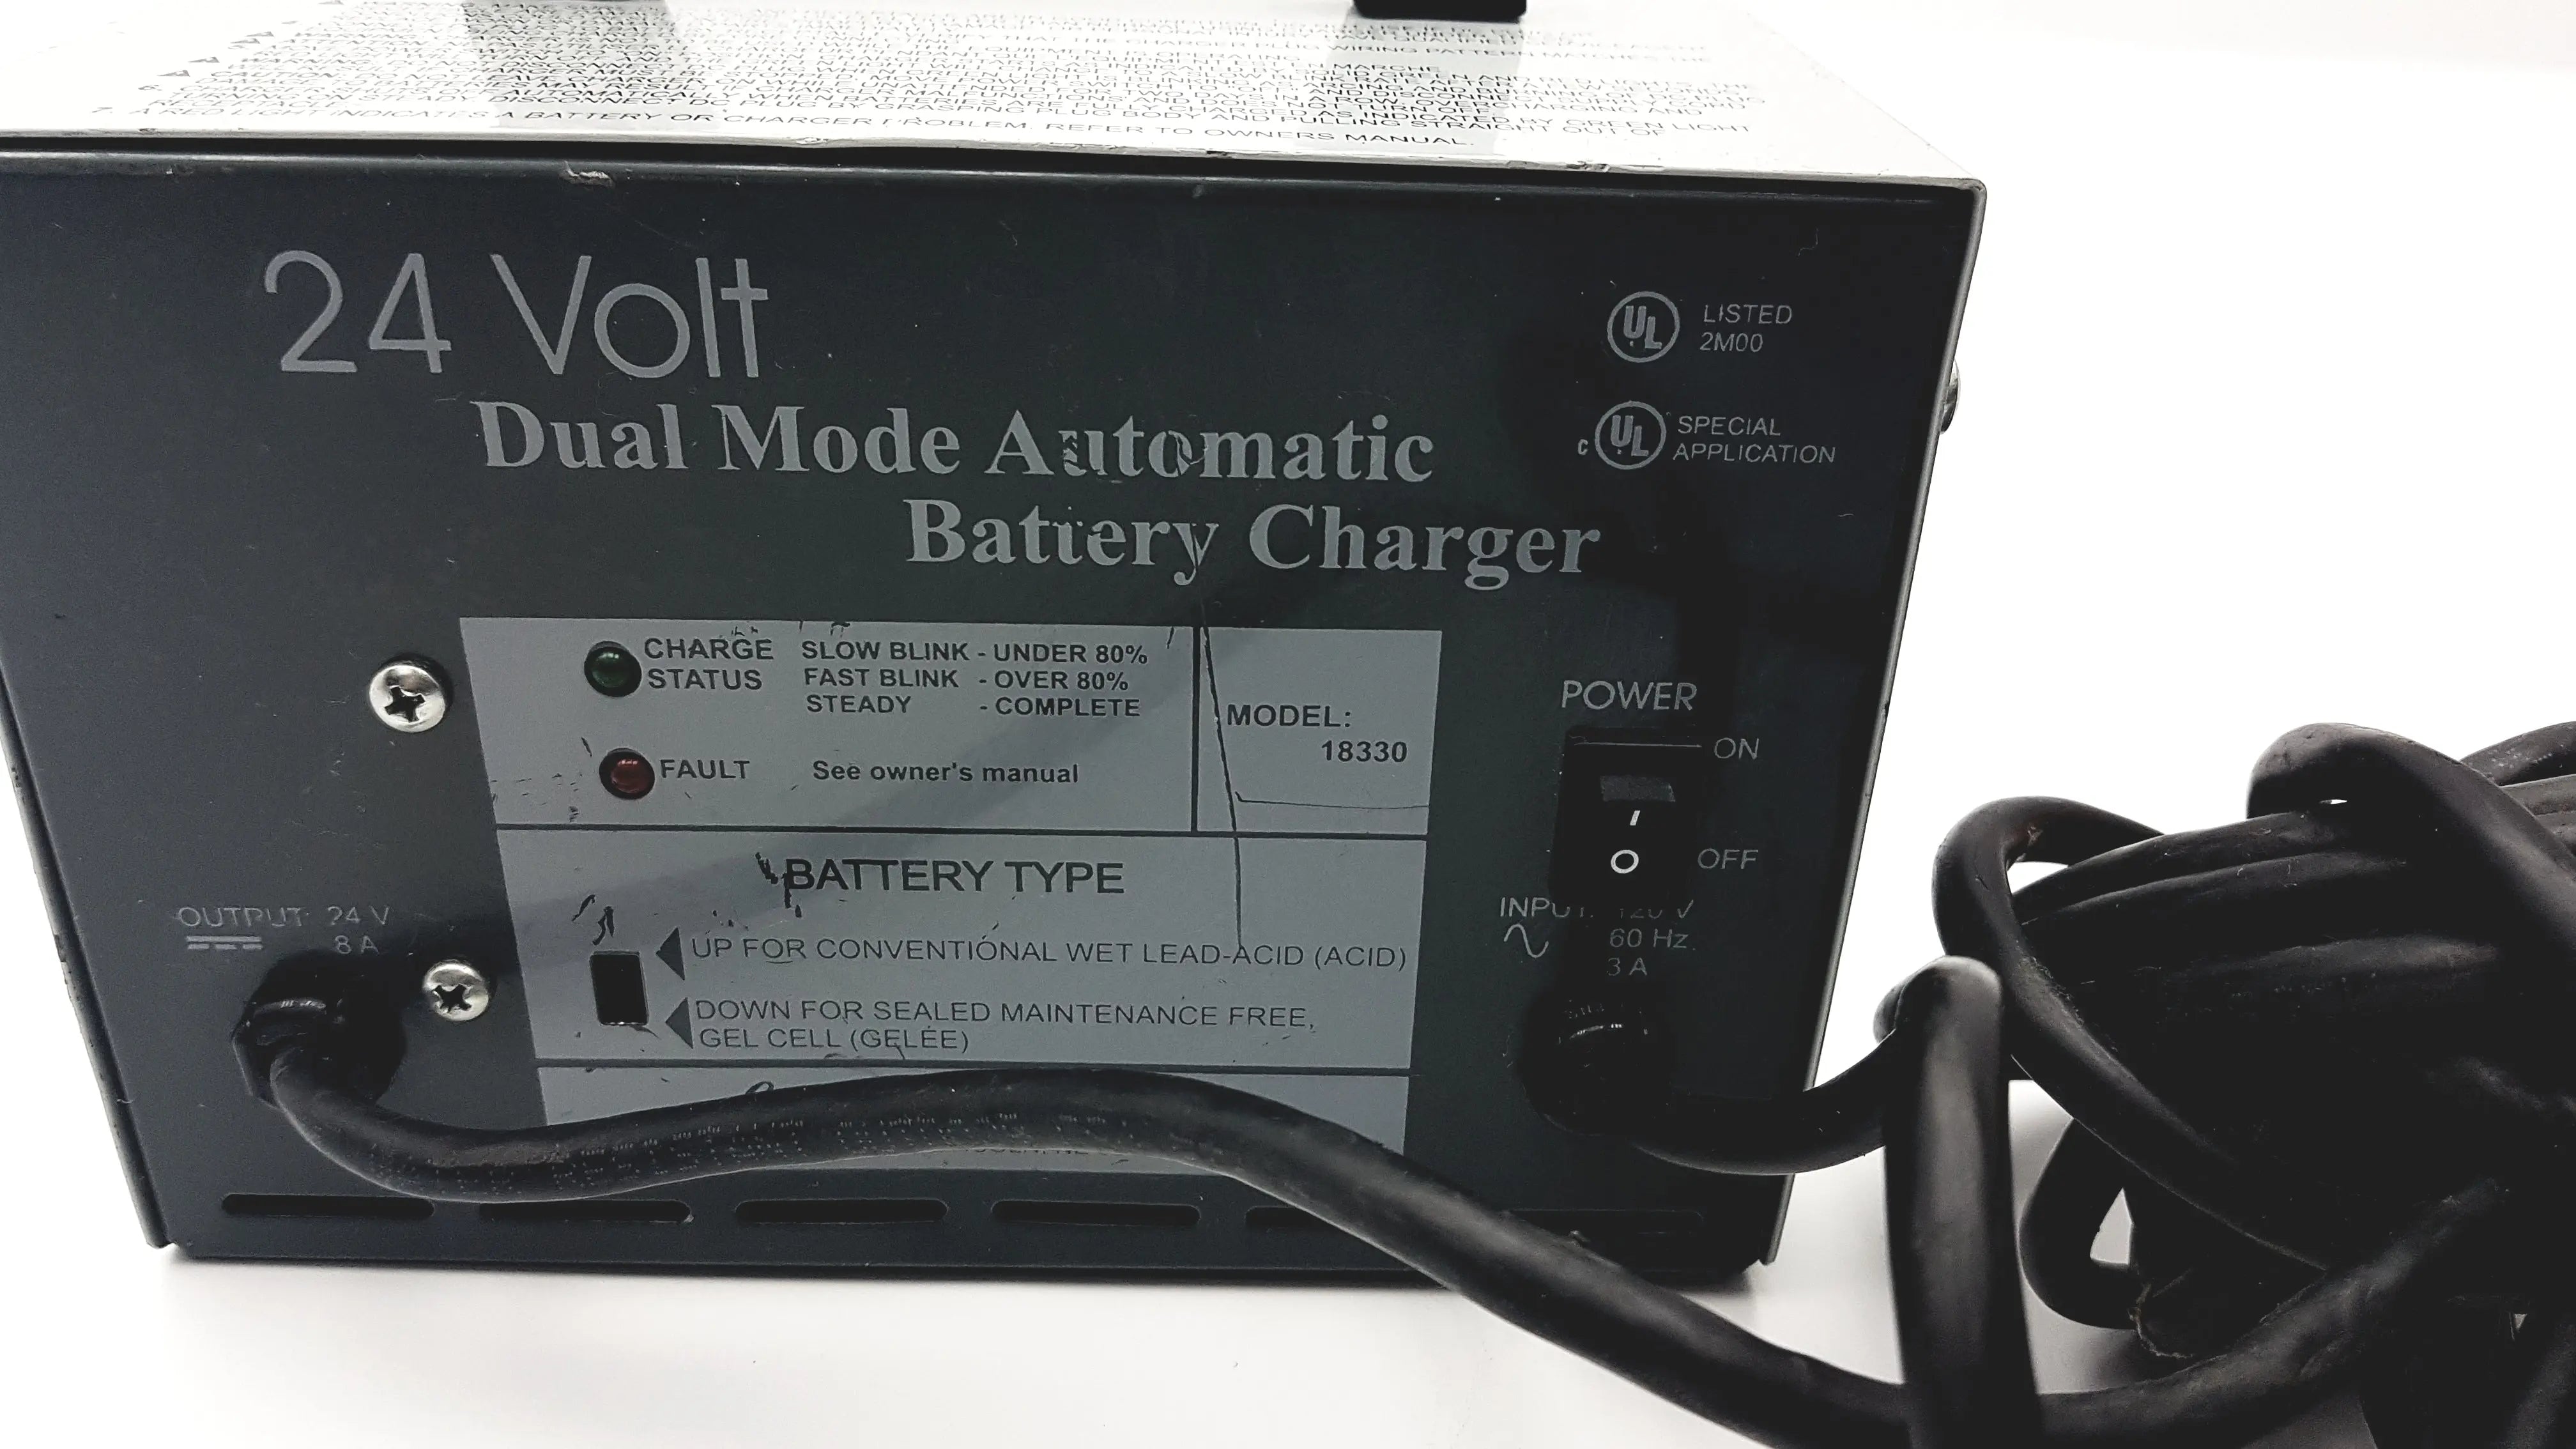 Load image into Gallery viewer, A Biomedical Service Lester Electronics 24 Volt Dual Mode Automatic Battery Charger 18330 105.00